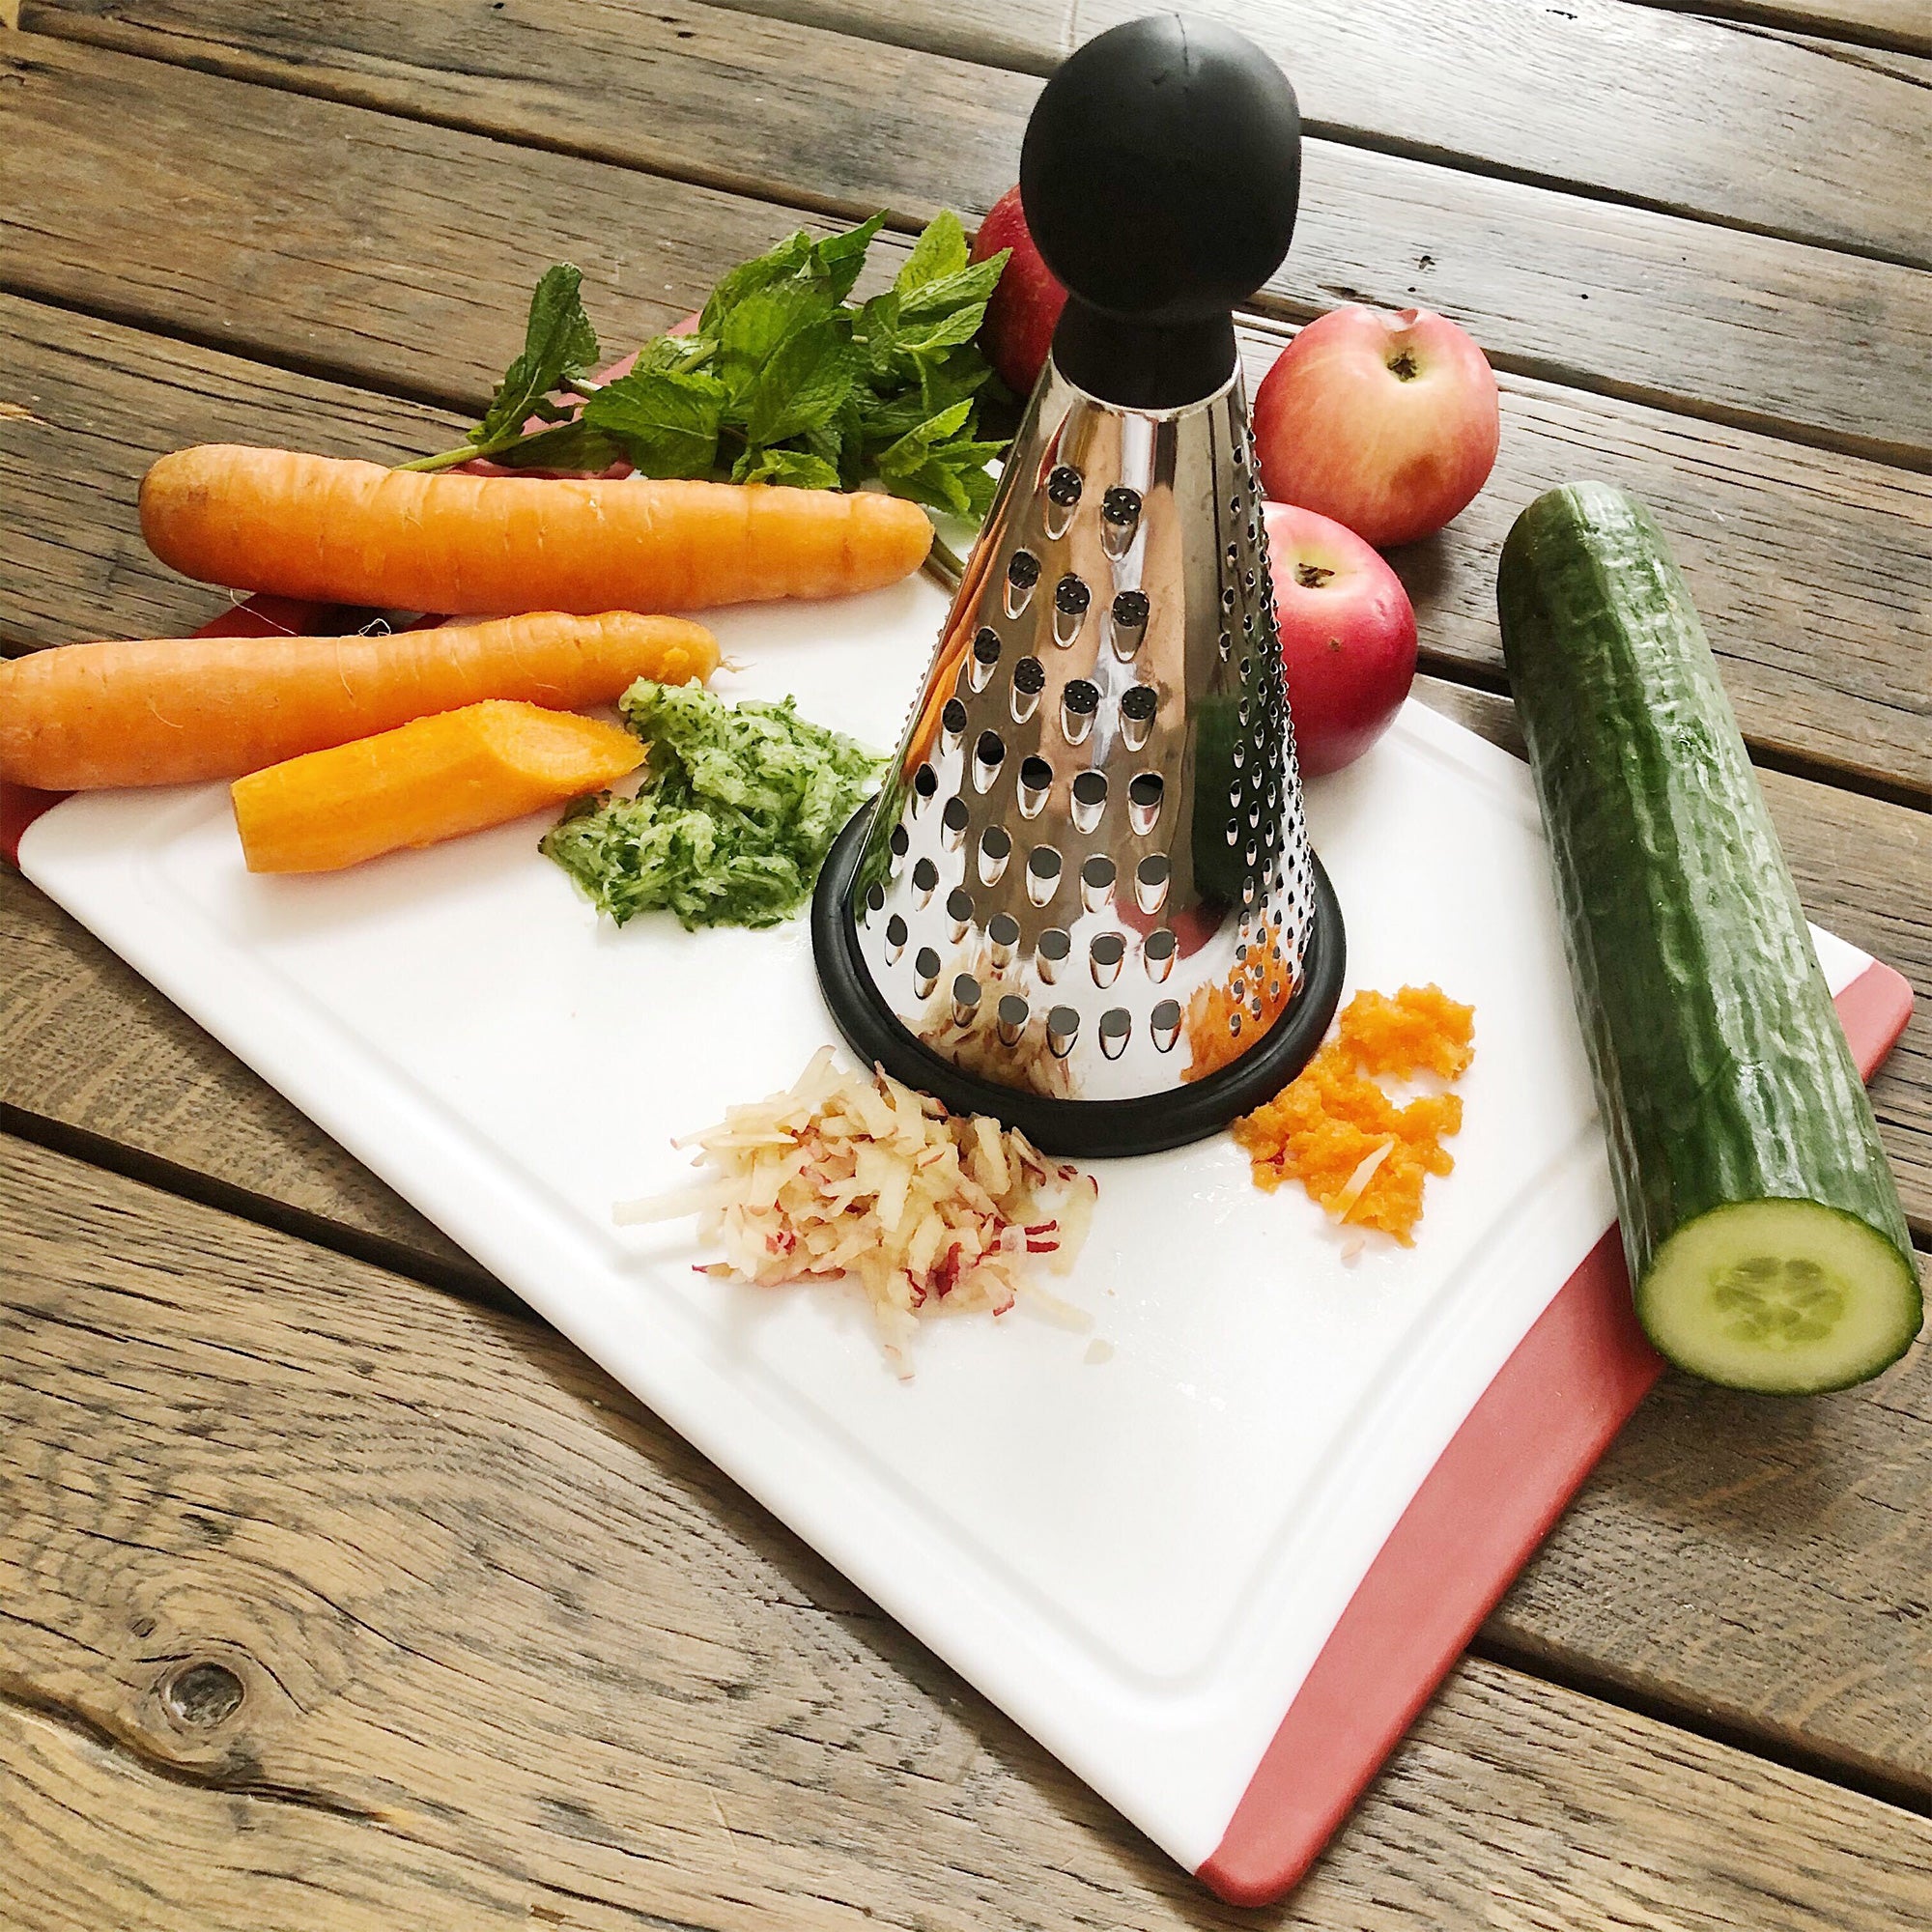 Stainless Steel Cheese Grater - 3 Sided